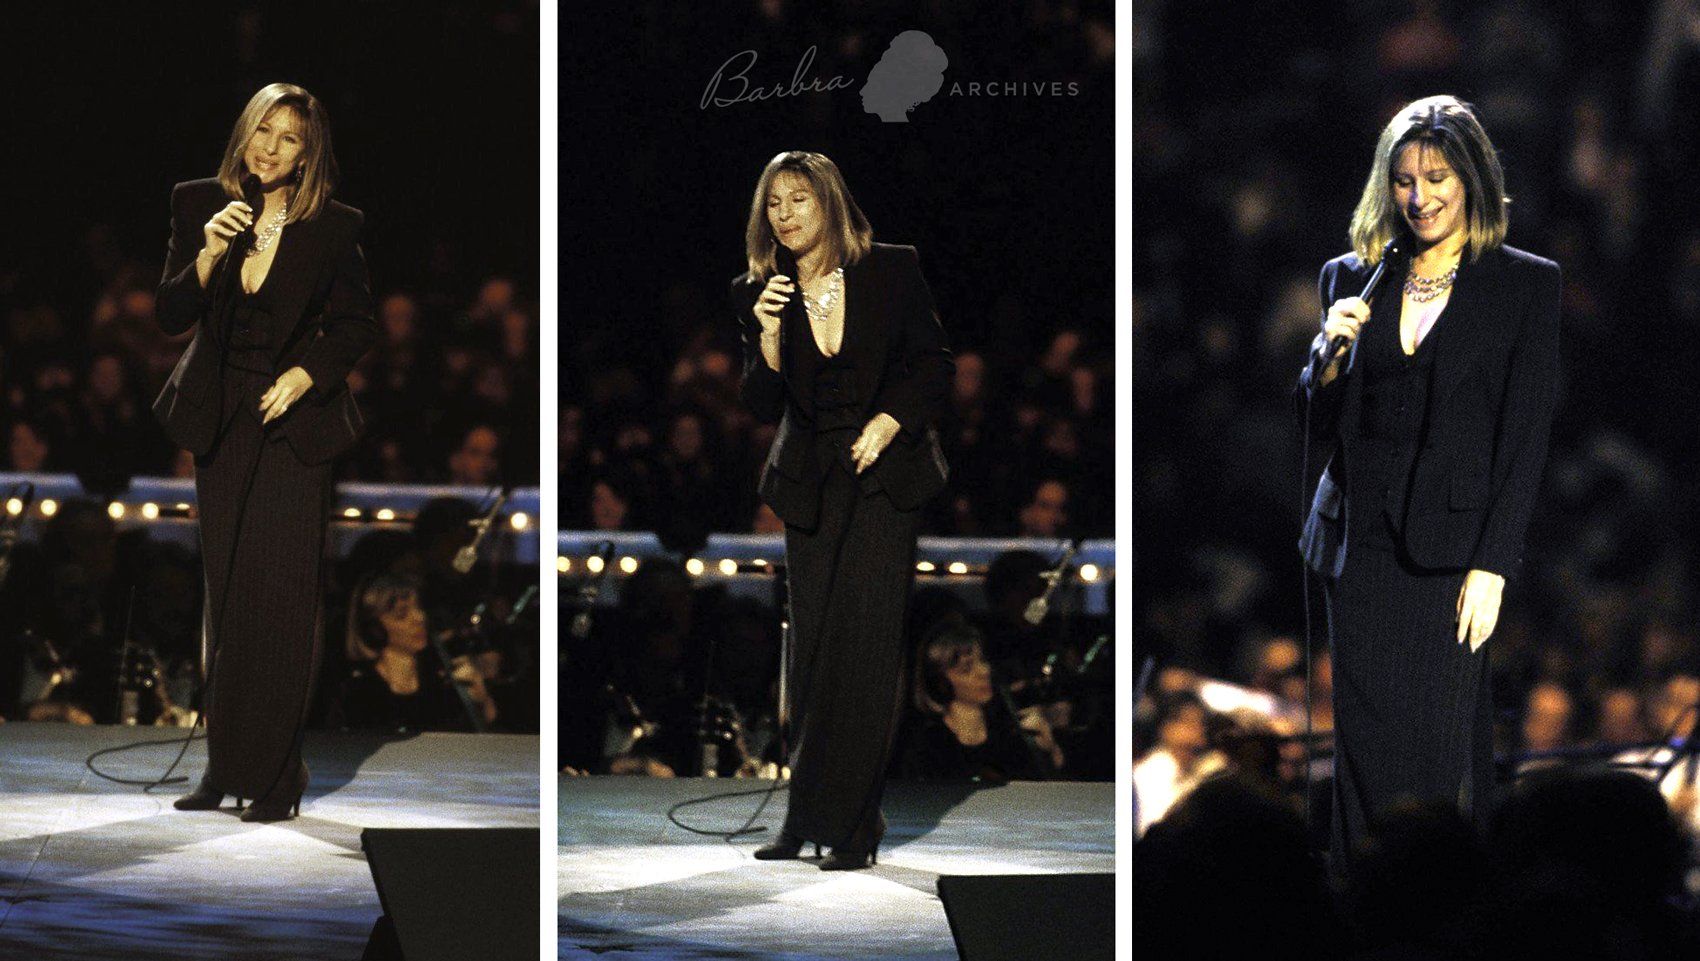 Streisand, wearing pin striped suit and skirt, sings for President Clinton.